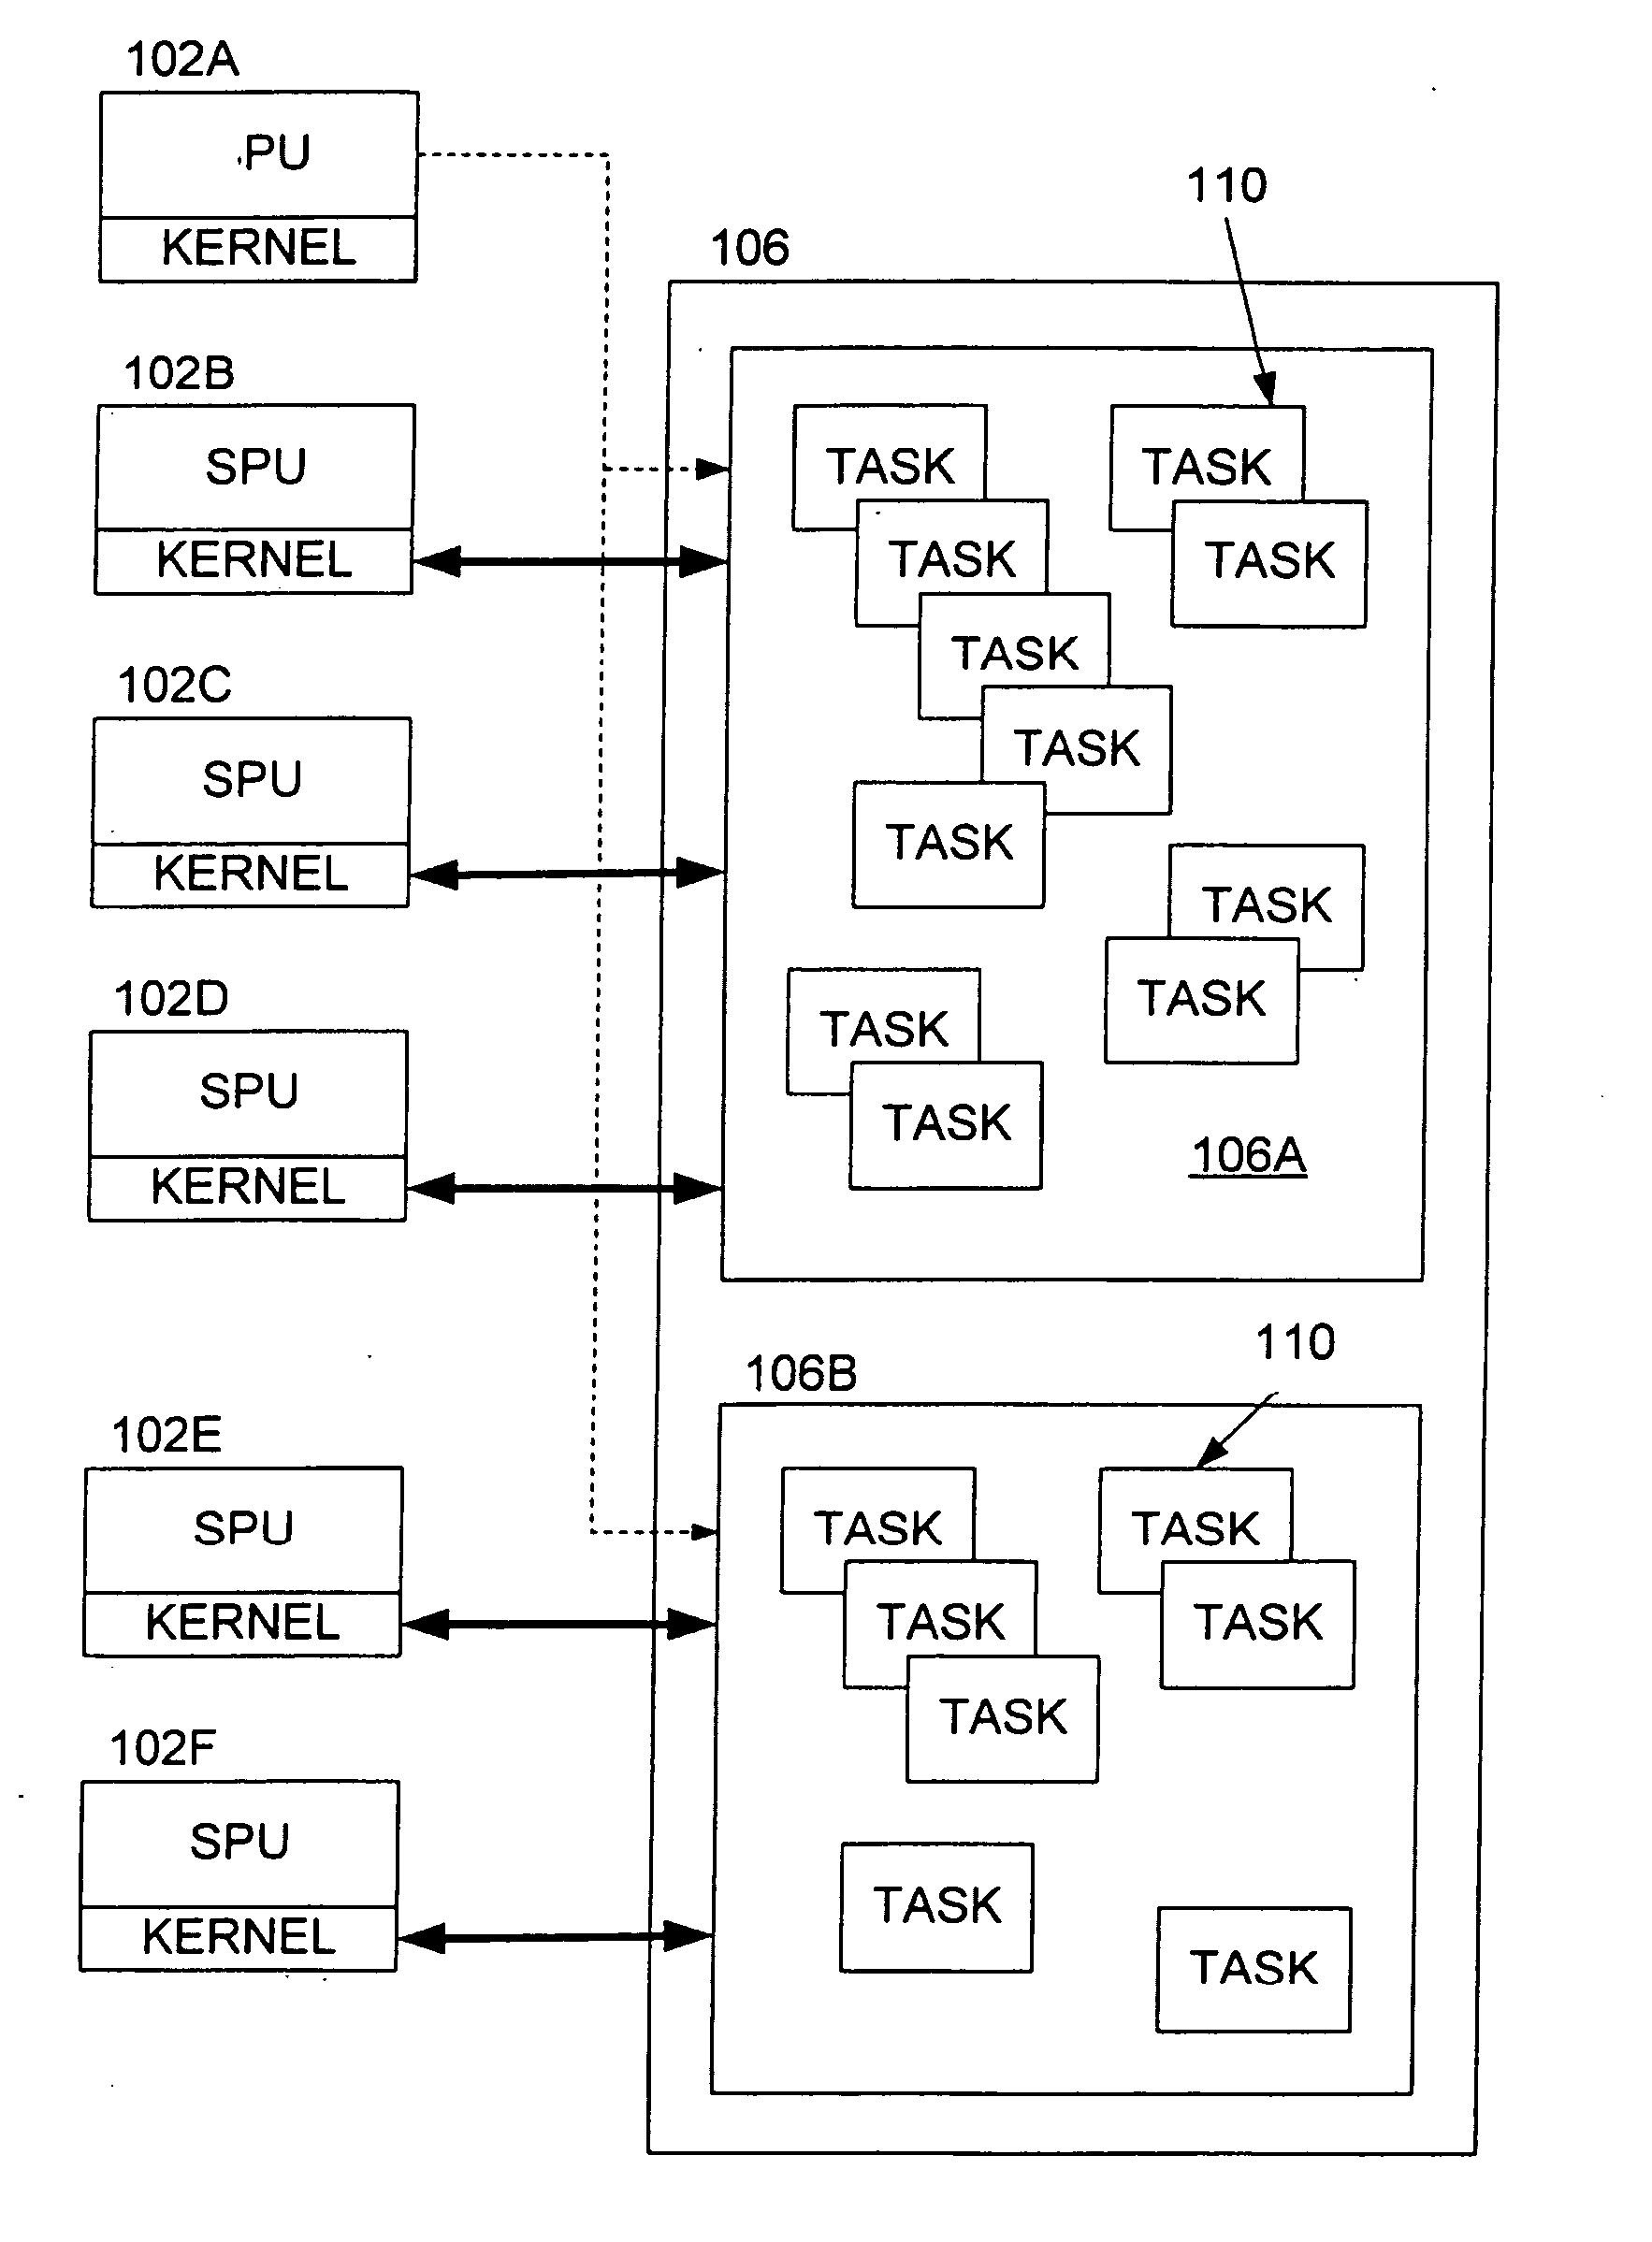 Methods and apparatus for task management in a multi-processor system